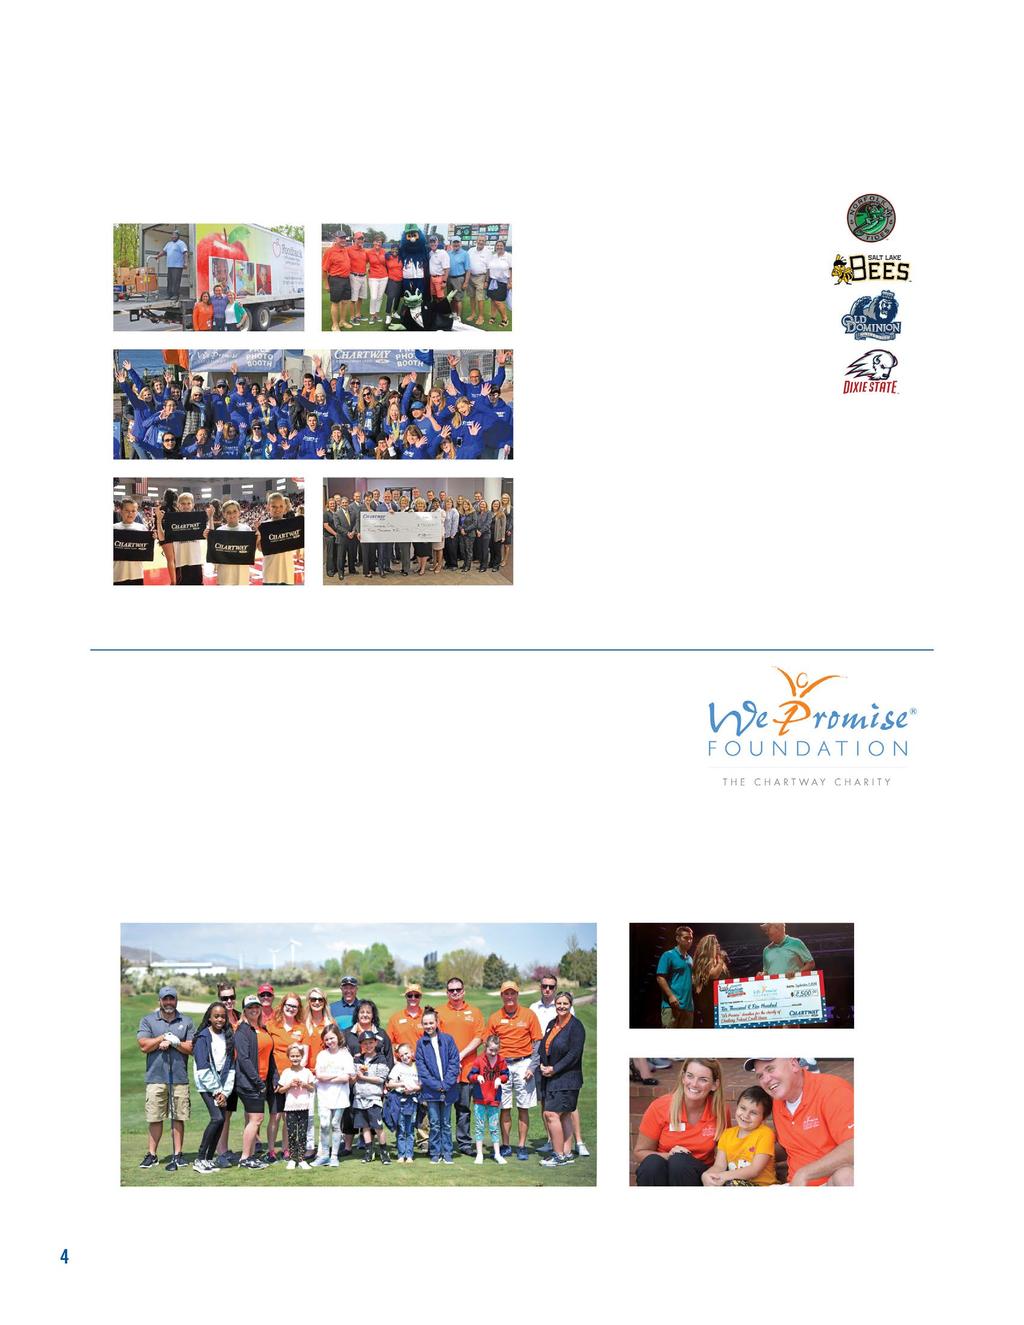 COMMUNITY COMMITMENT EVENTS, SPONSORSHIPS AND OTHER PROGRAMS AMERICAN MUSIC FESTIVAL CHARTWAY HALF MARATHON AND WE PROMISE FOUNDATION 5K NORFOLK TIDES BASEBALL SALT LAKE BEES BASEBALL OLD DOMINION